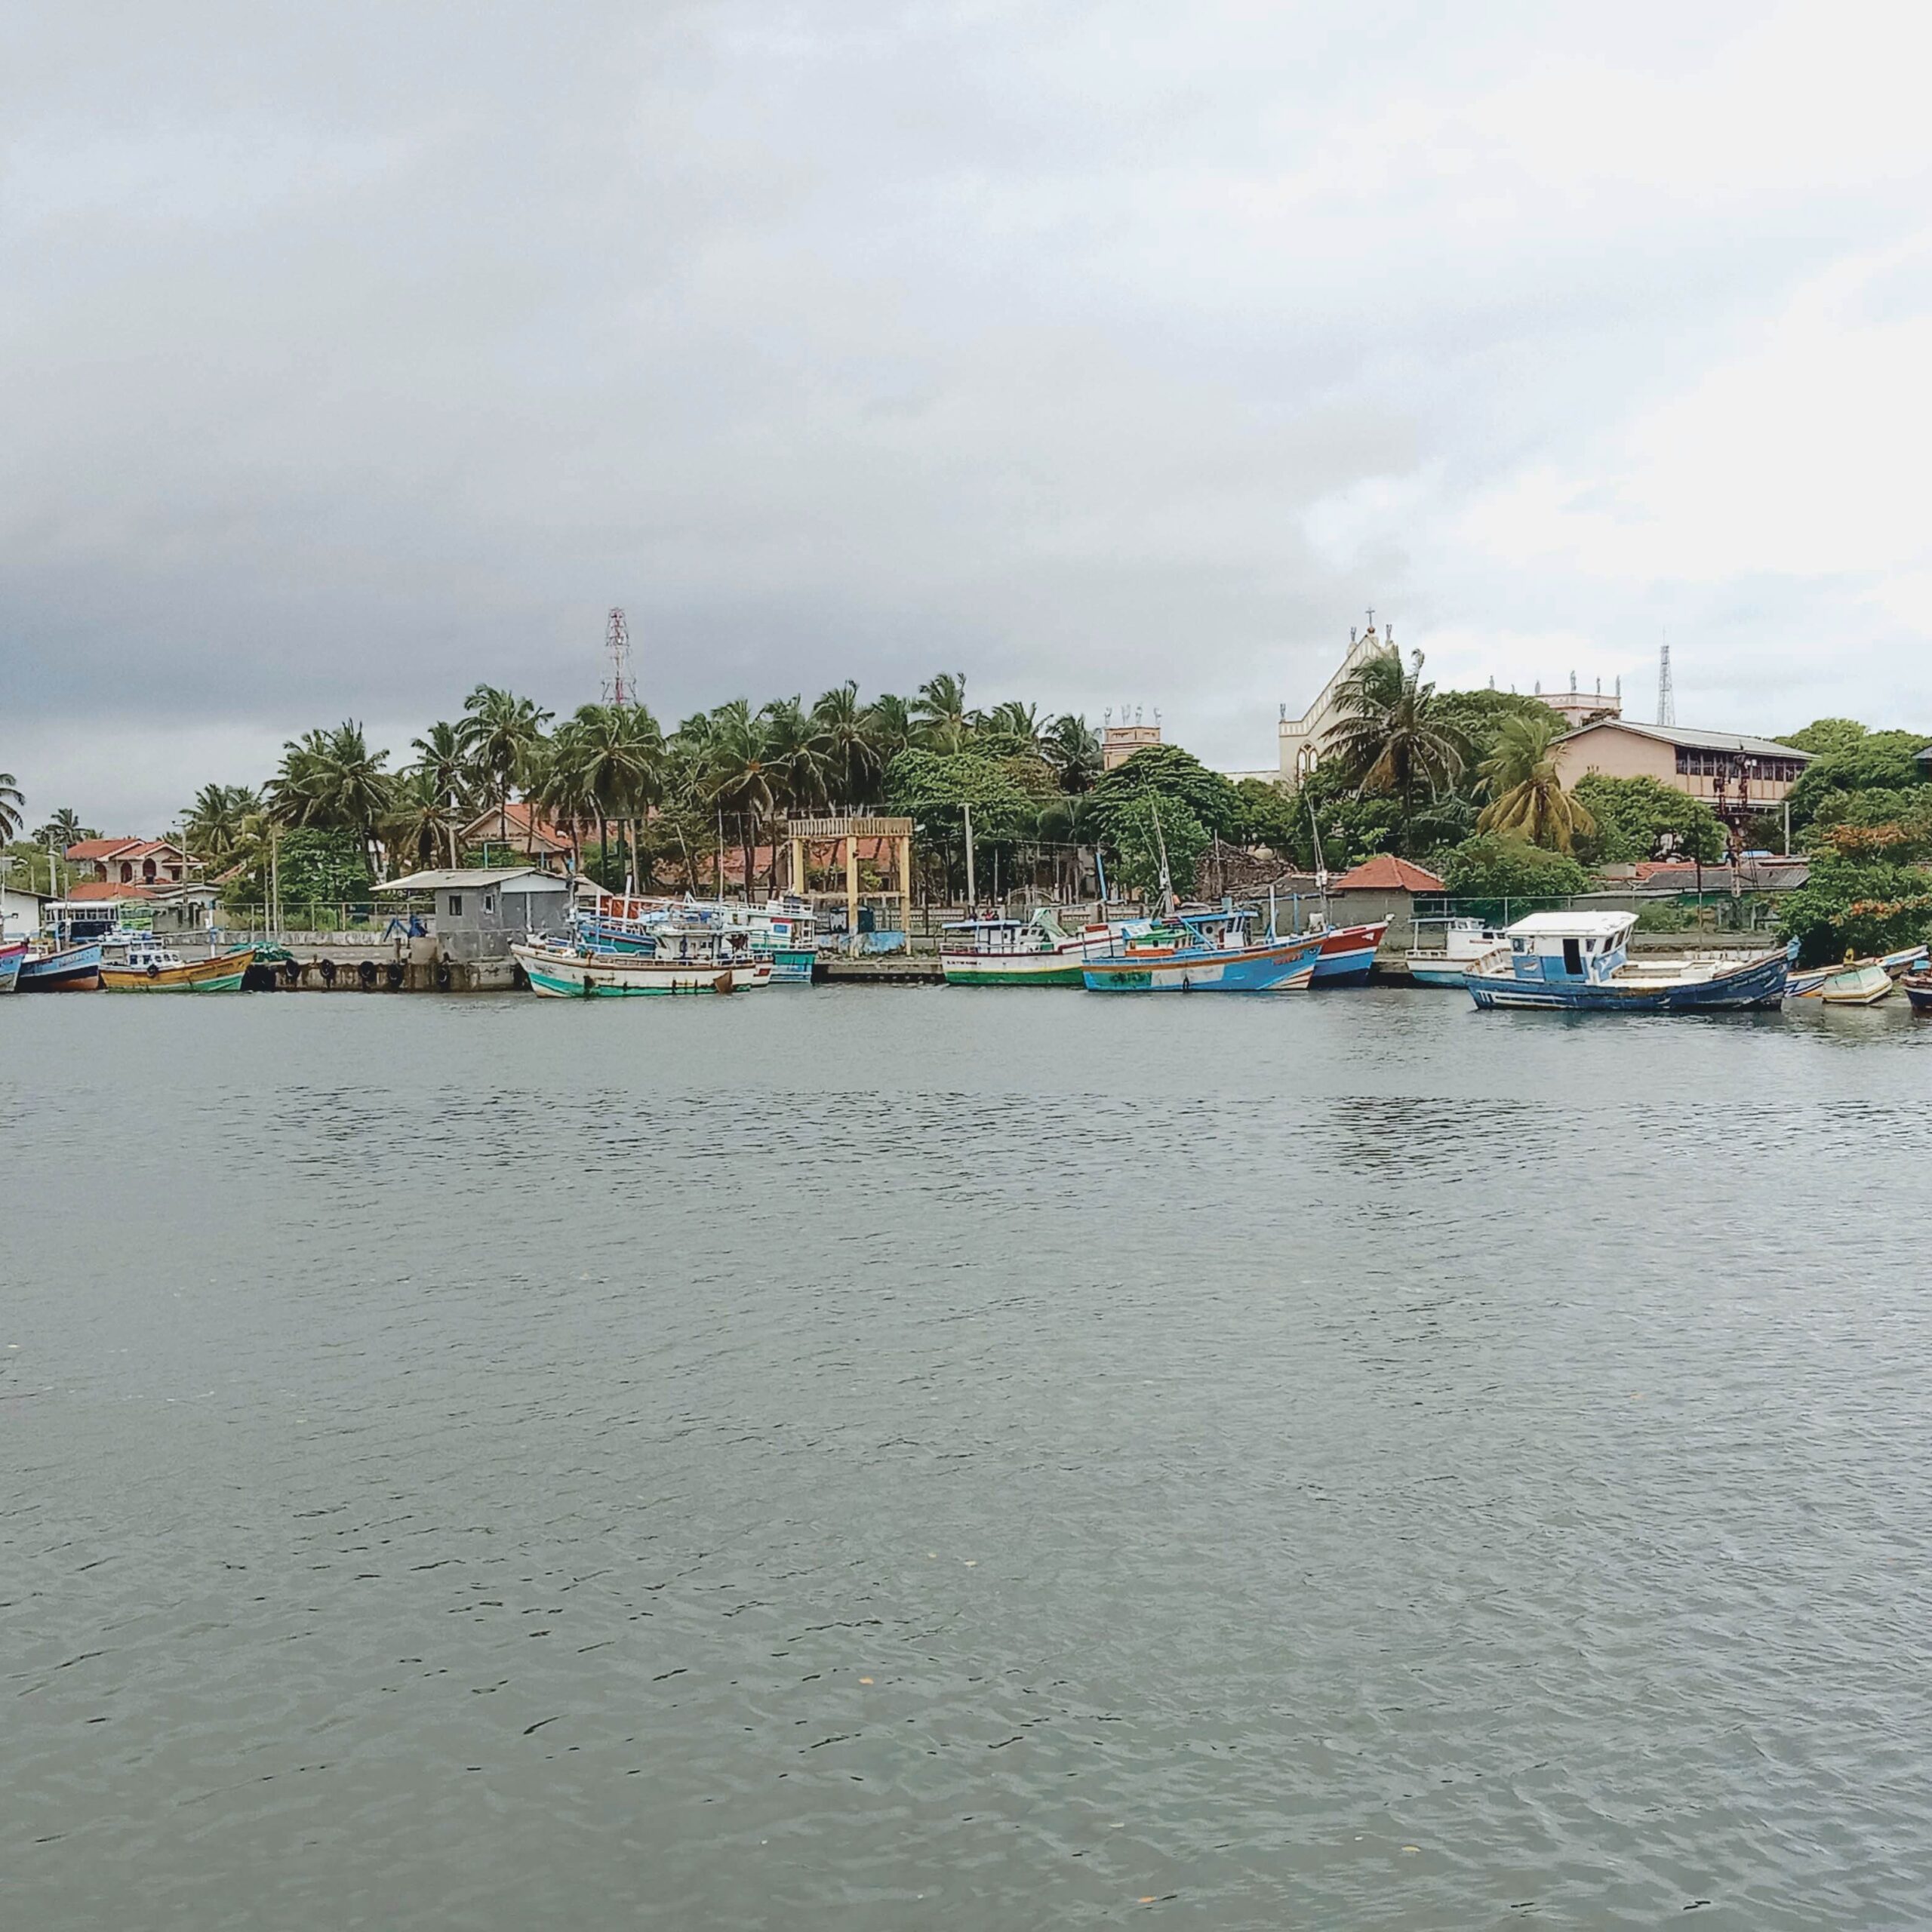 The backwaters of Chilaw, a small fishing town in Puttalam District, Northwestern Province of Sri Lanka